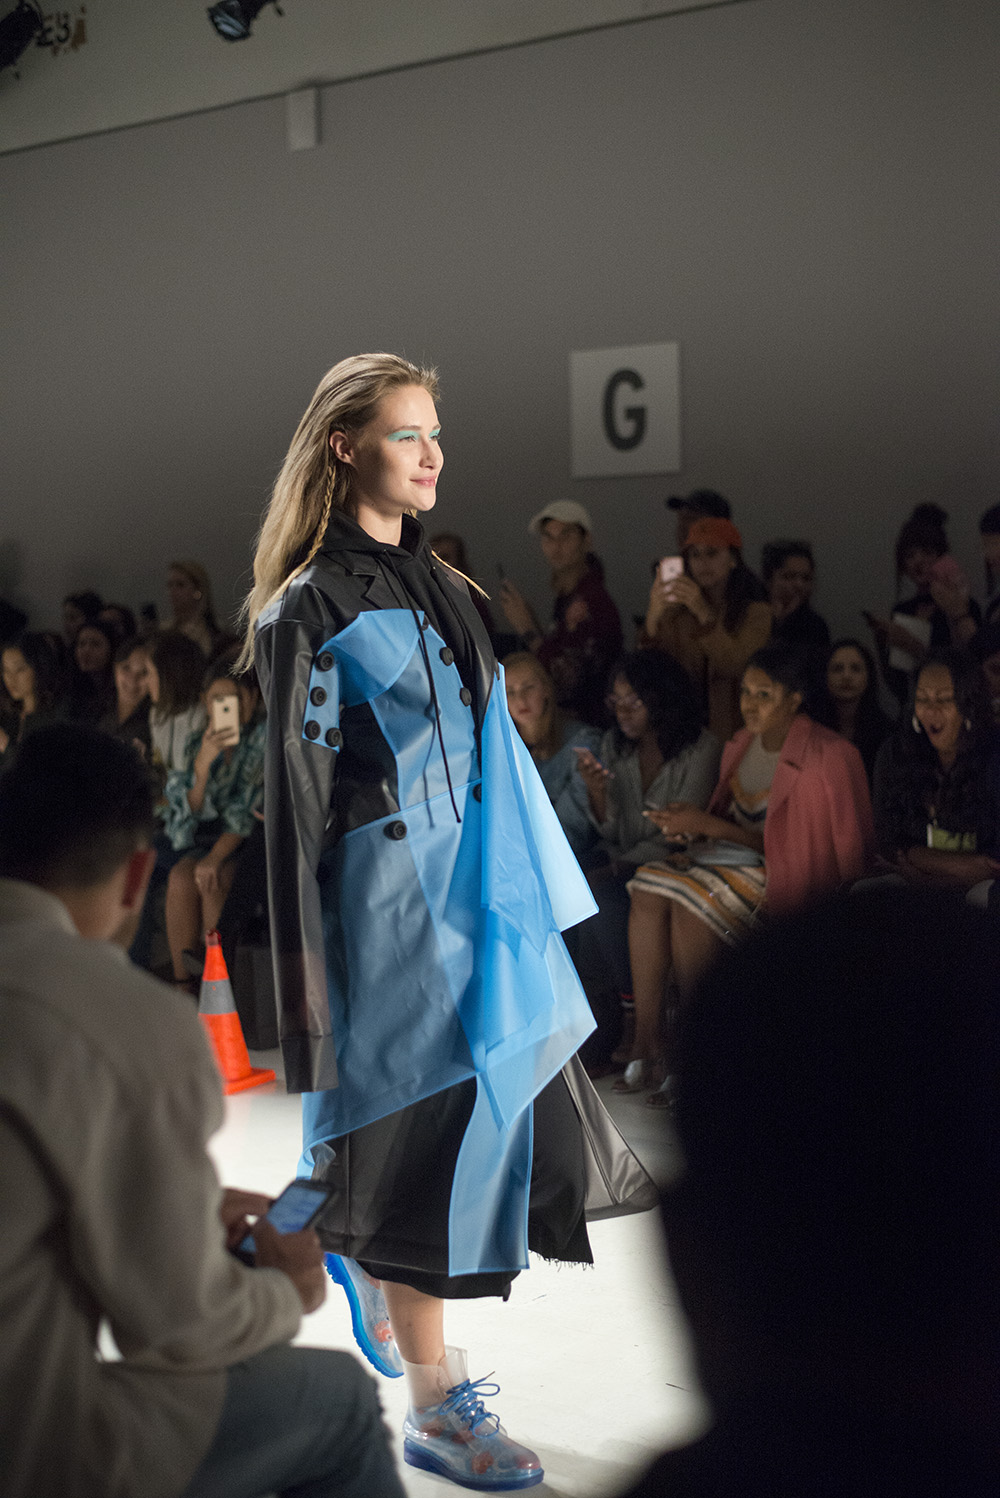 NYFW runway show + tips and tricks on how to attend. 